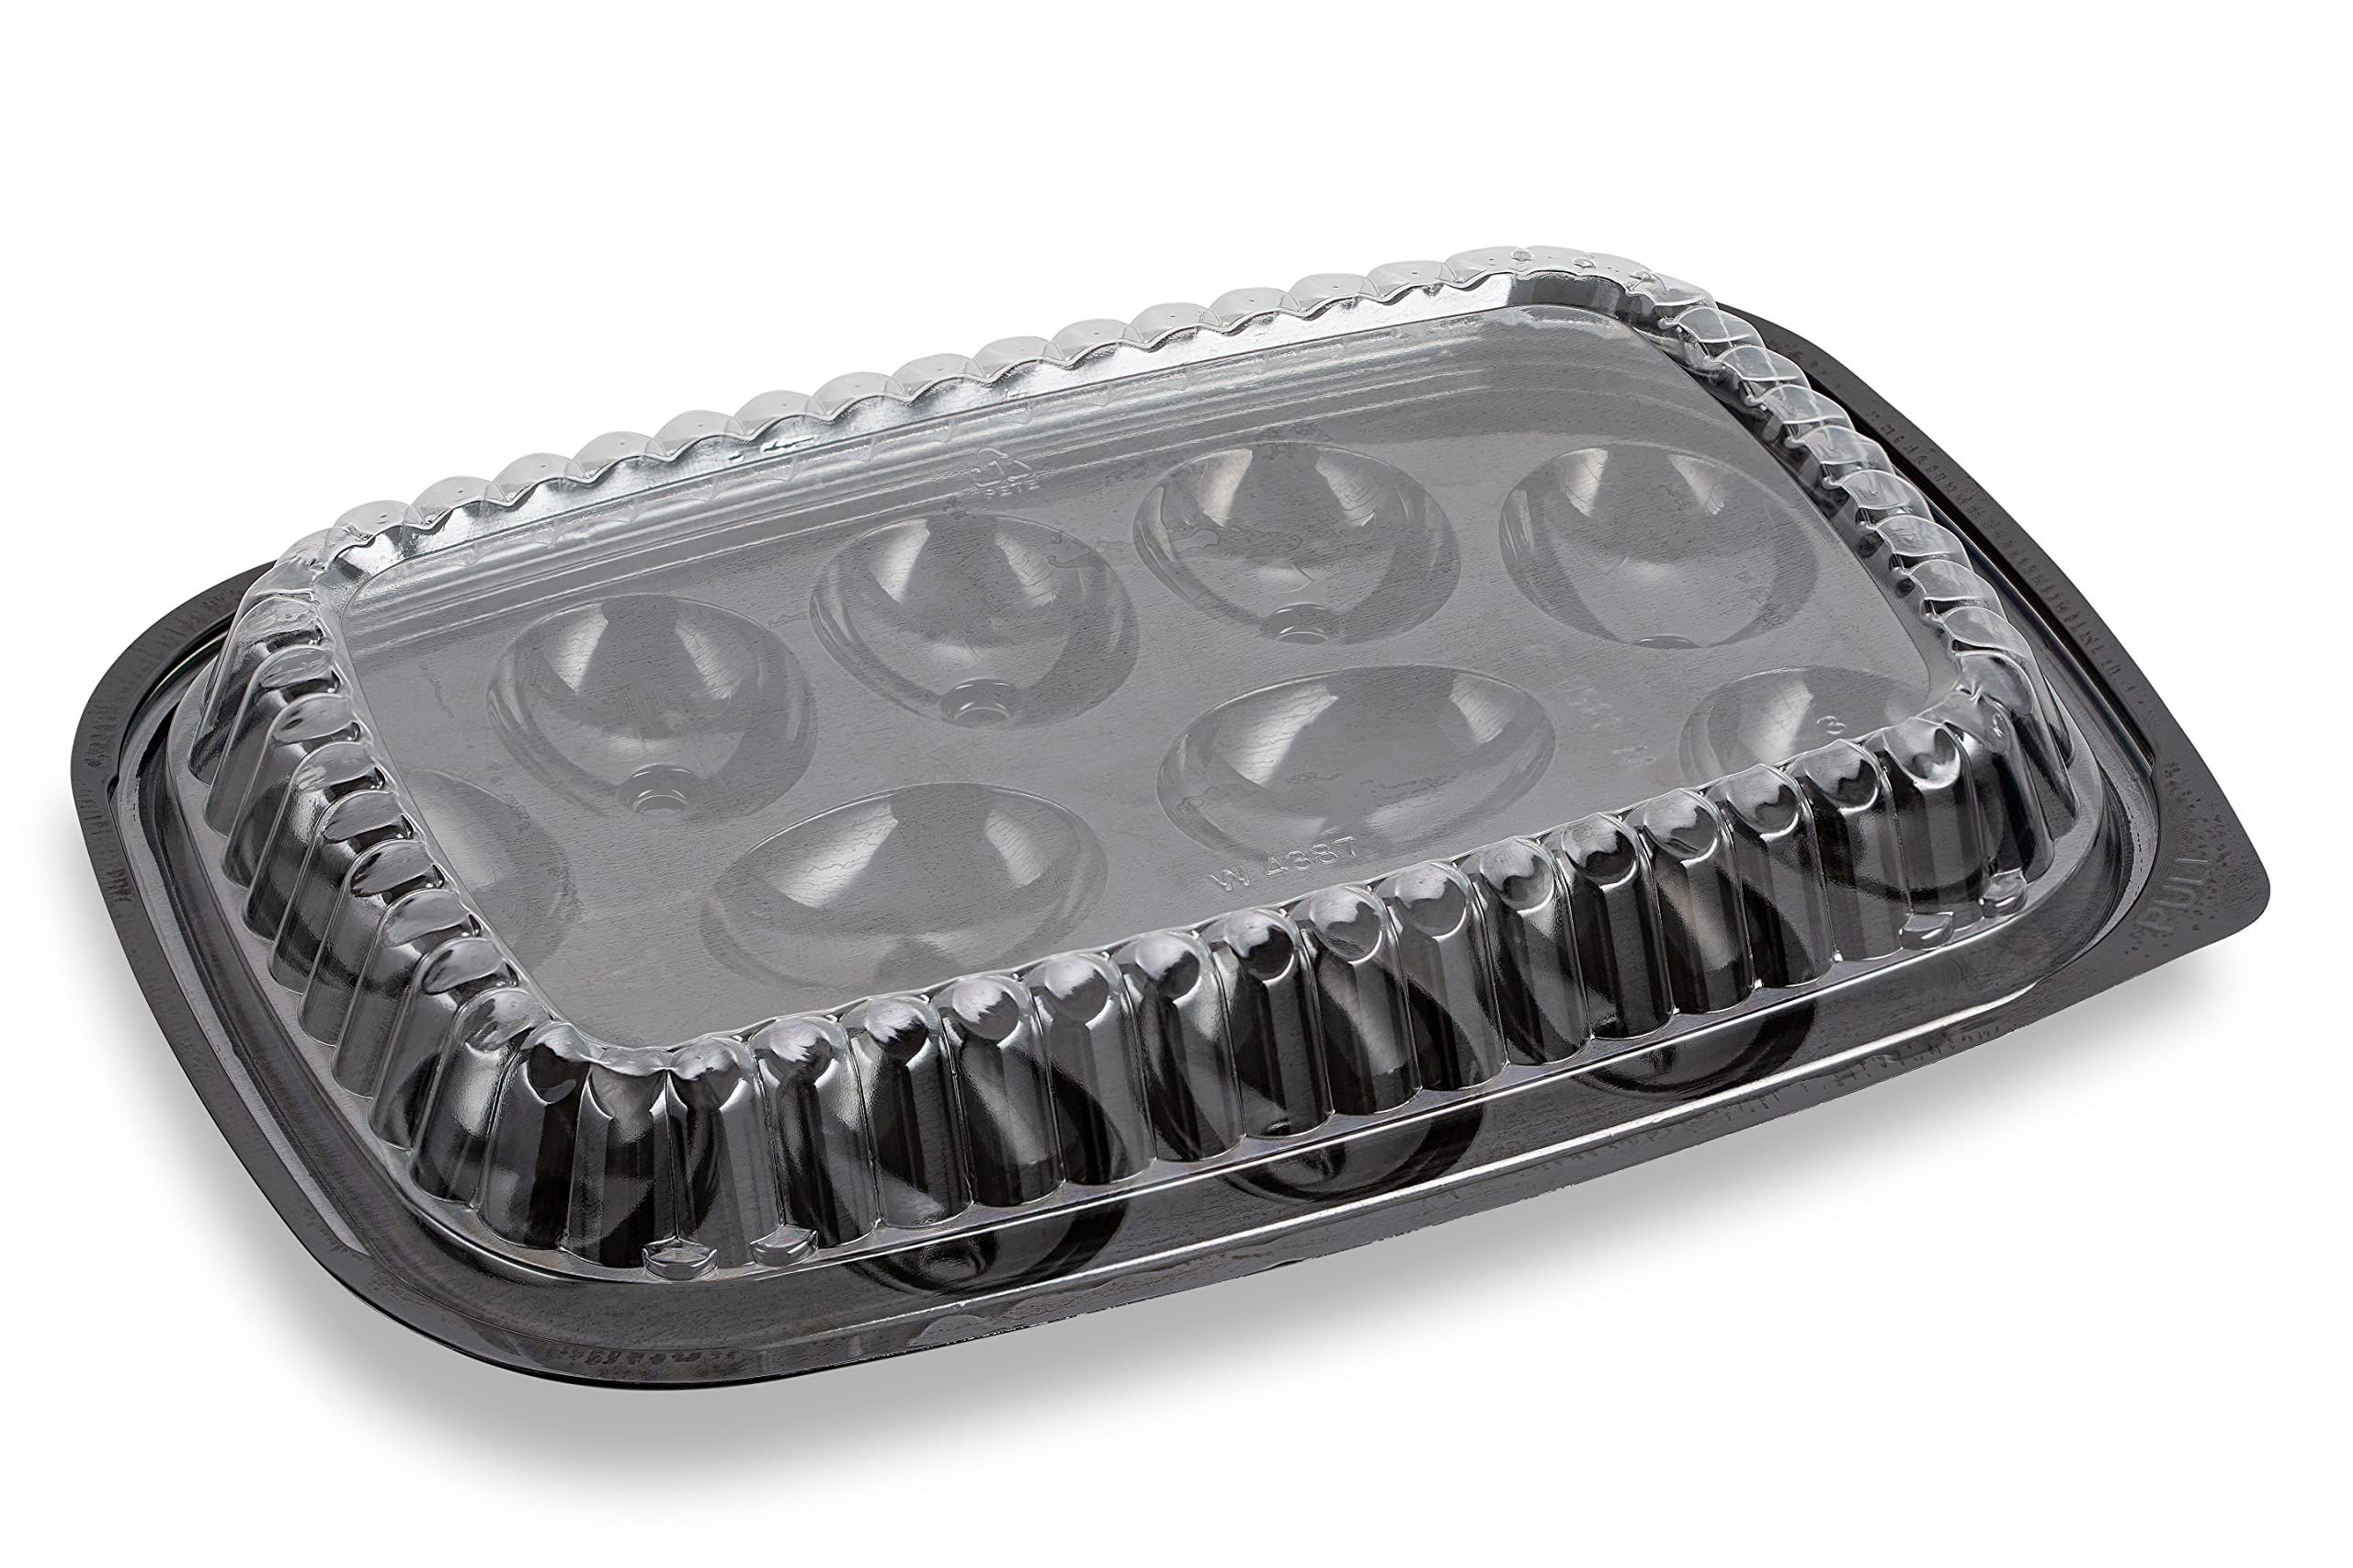 30 Count Deviled Egg Disposable Tray with lid - 24 Pack (371009)